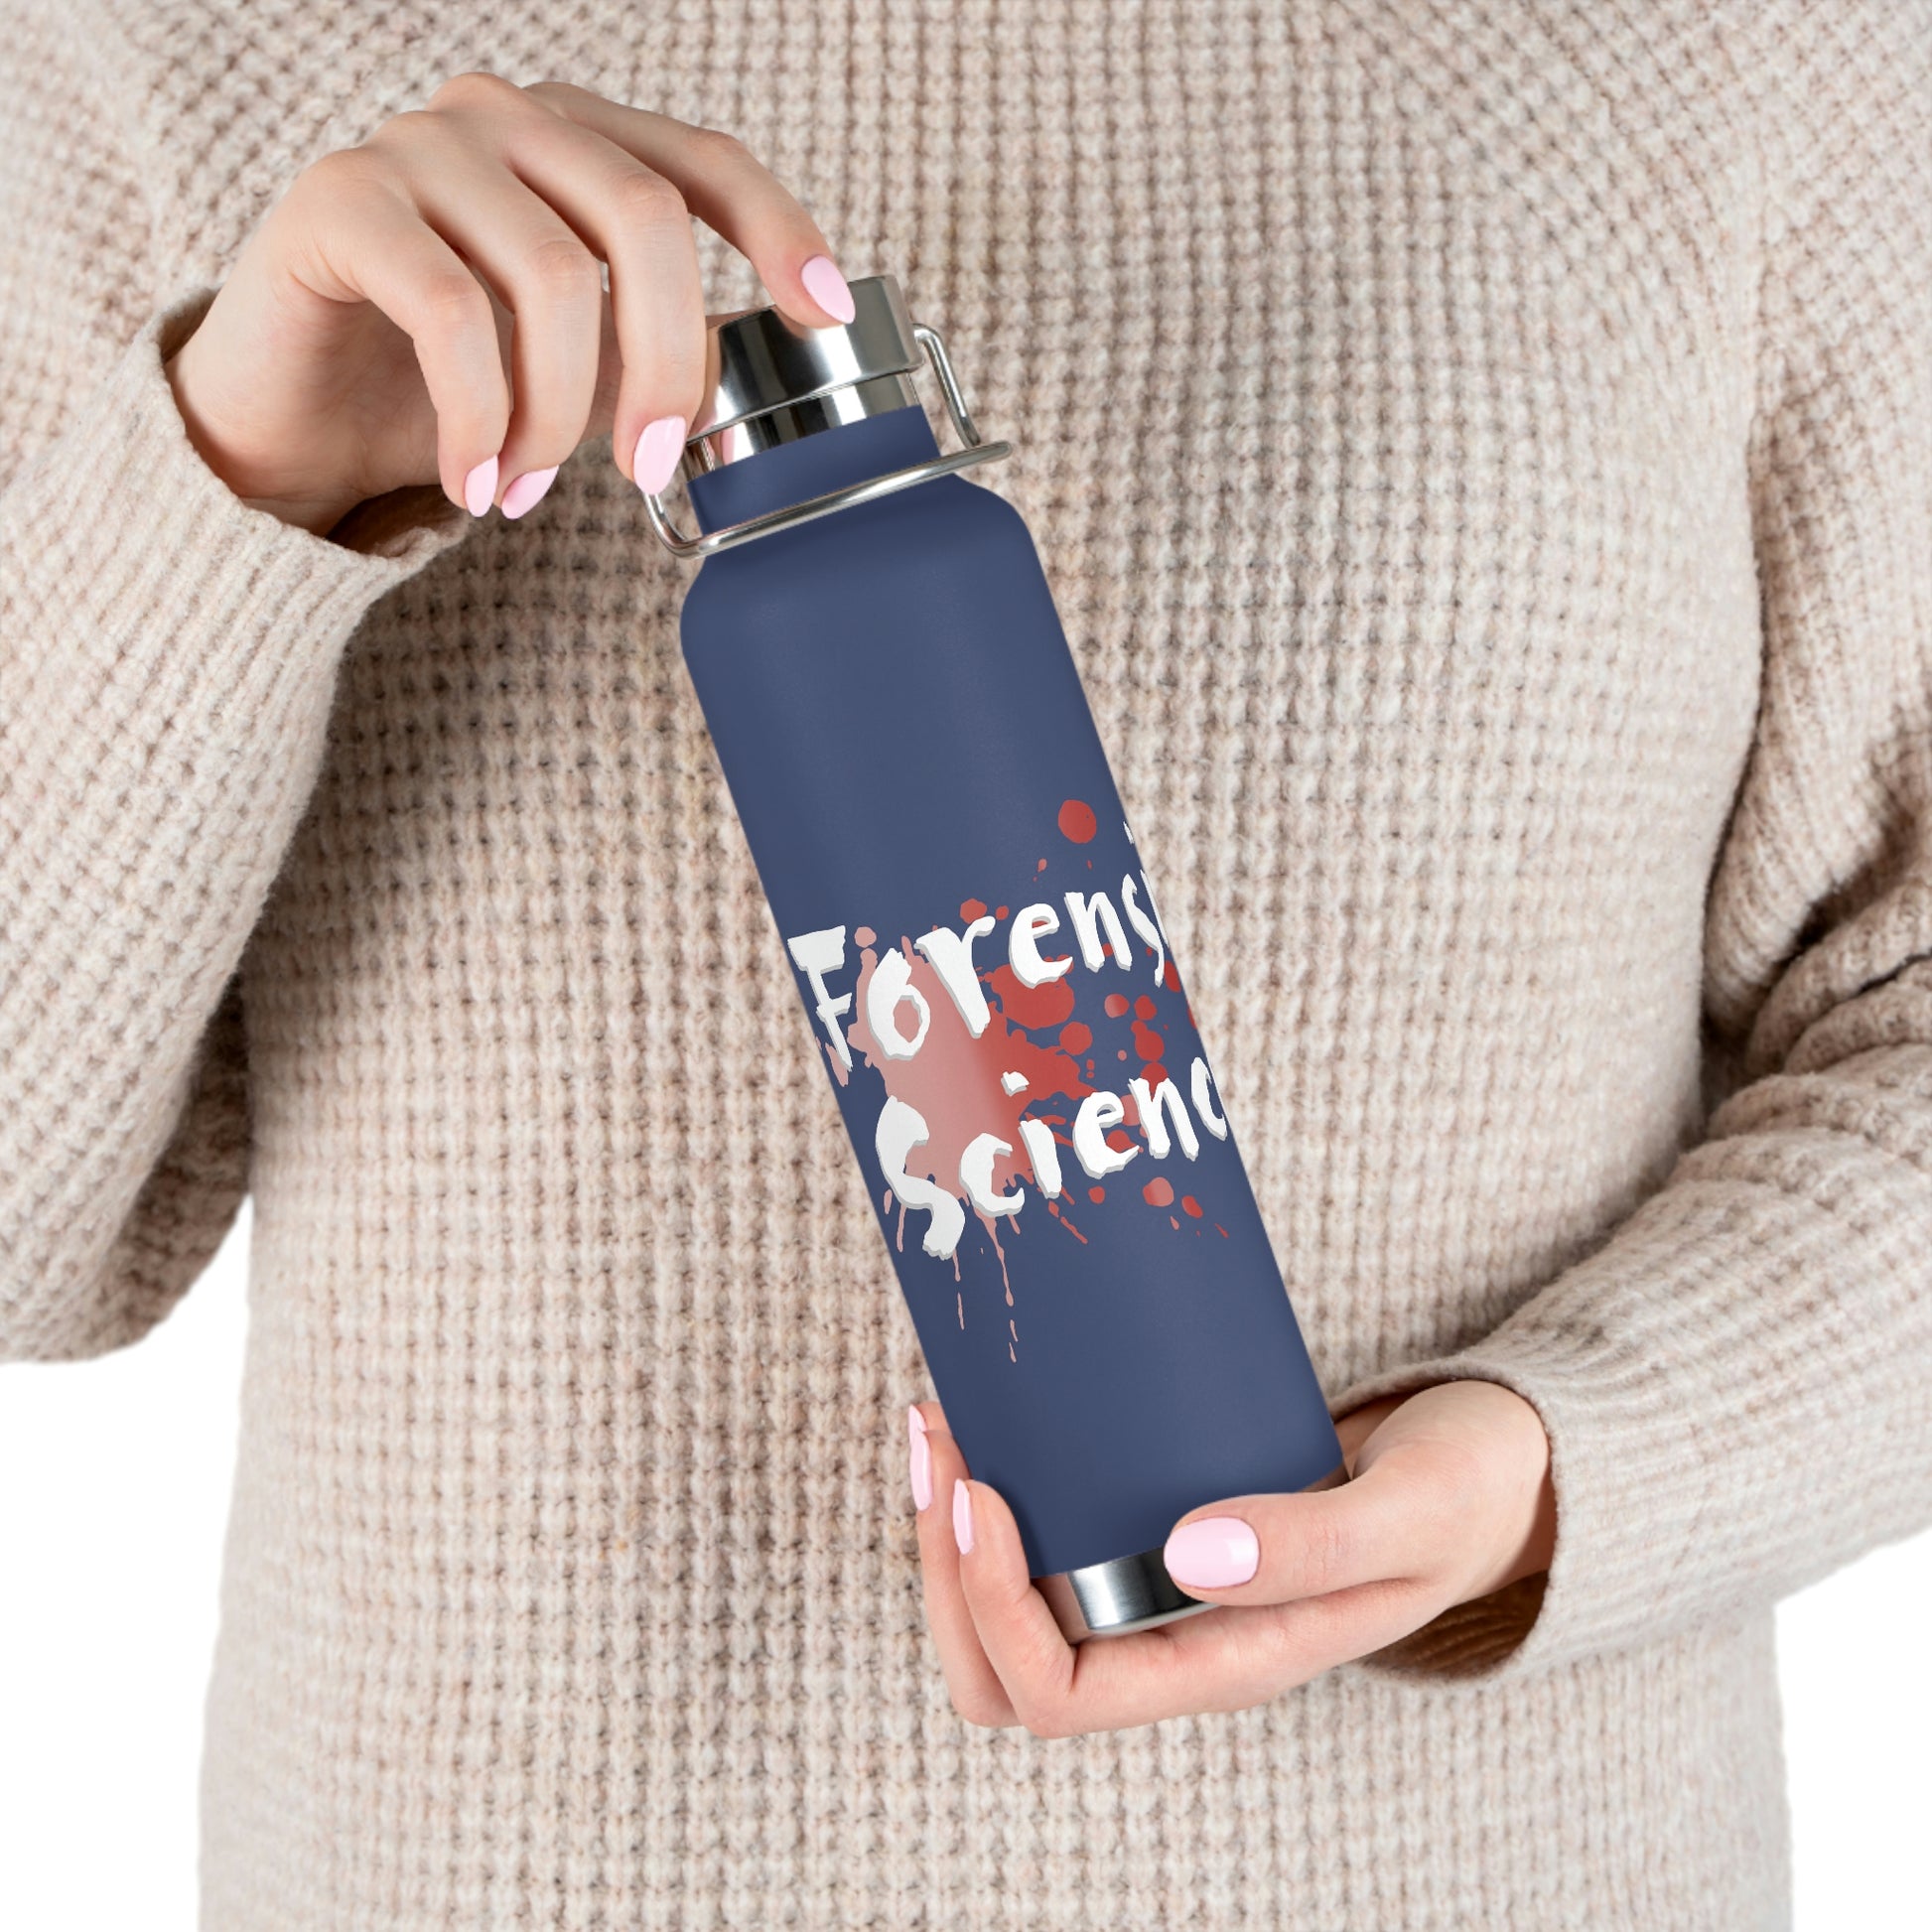 This Original Forensic Science design copper vacuum insulated bottle has Double-wall construction means that hot liquids can remain hot up to 12 hours while colder choices can last a full 48 hours; that’s two whole days.